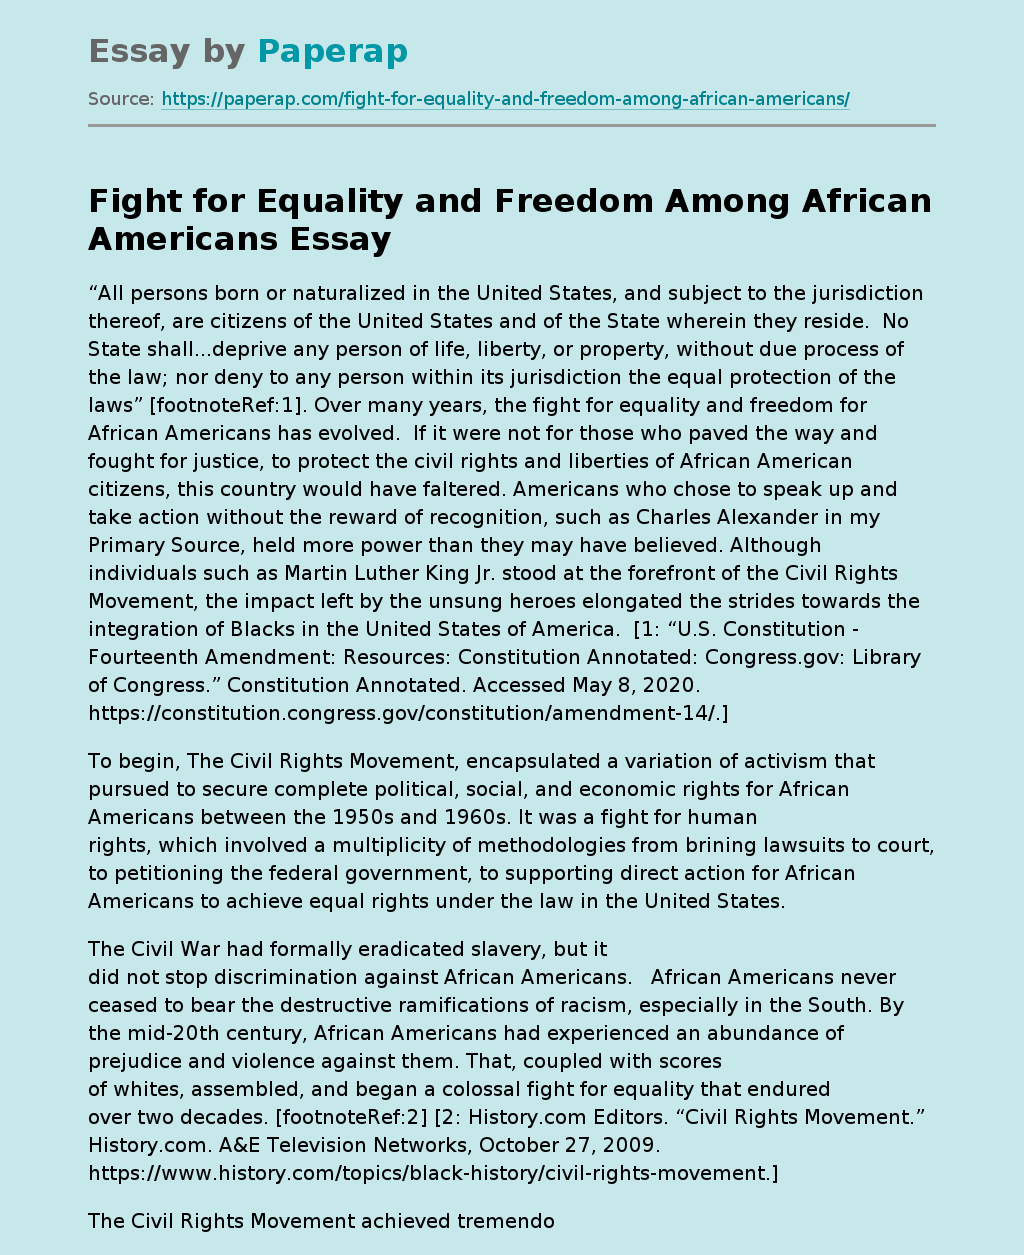 Fight for Equality and Freedom Among African Americans